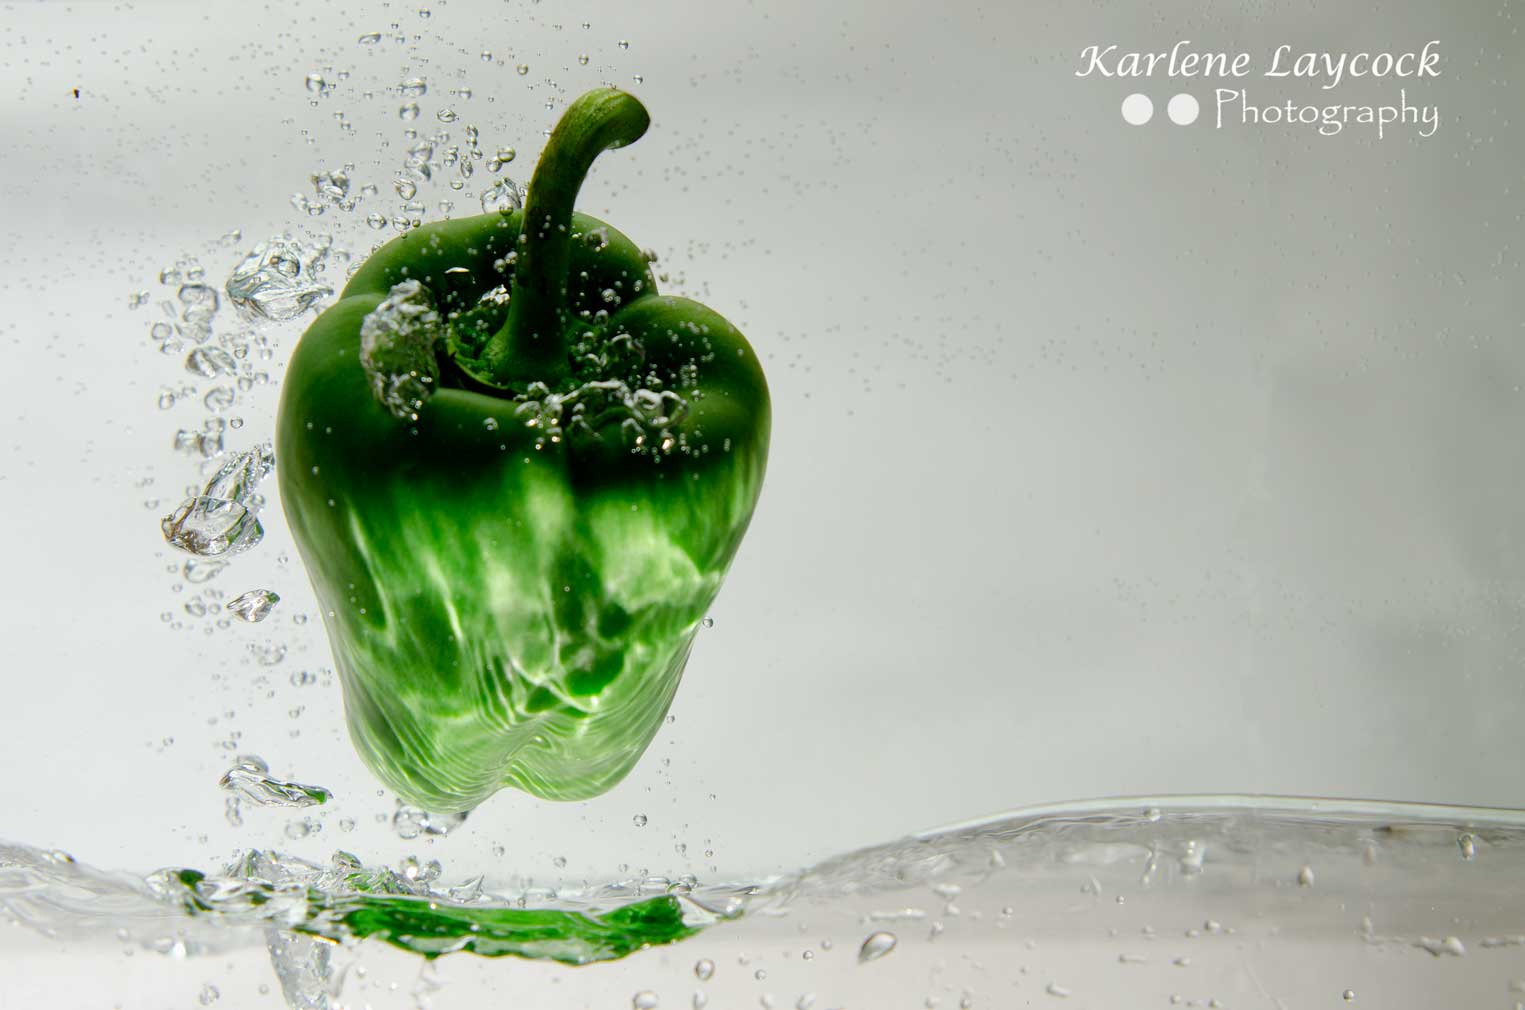 High Speed Photography Image of a Green Pepper in Water